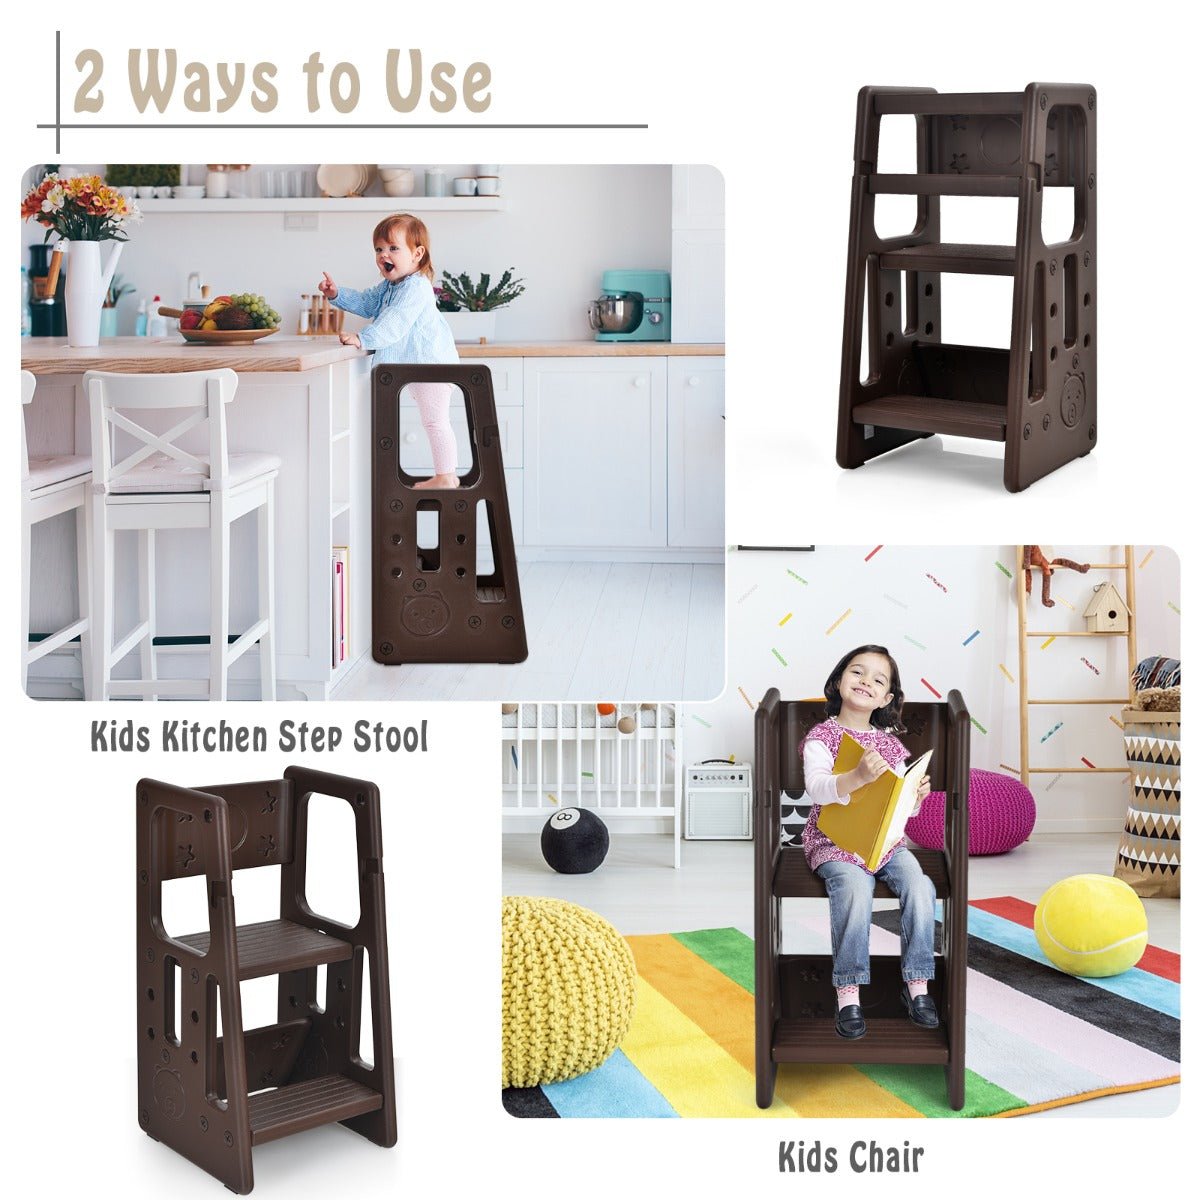 Kids Step Stool with Dual Safety Rails - Coffee-coloured Learning Support